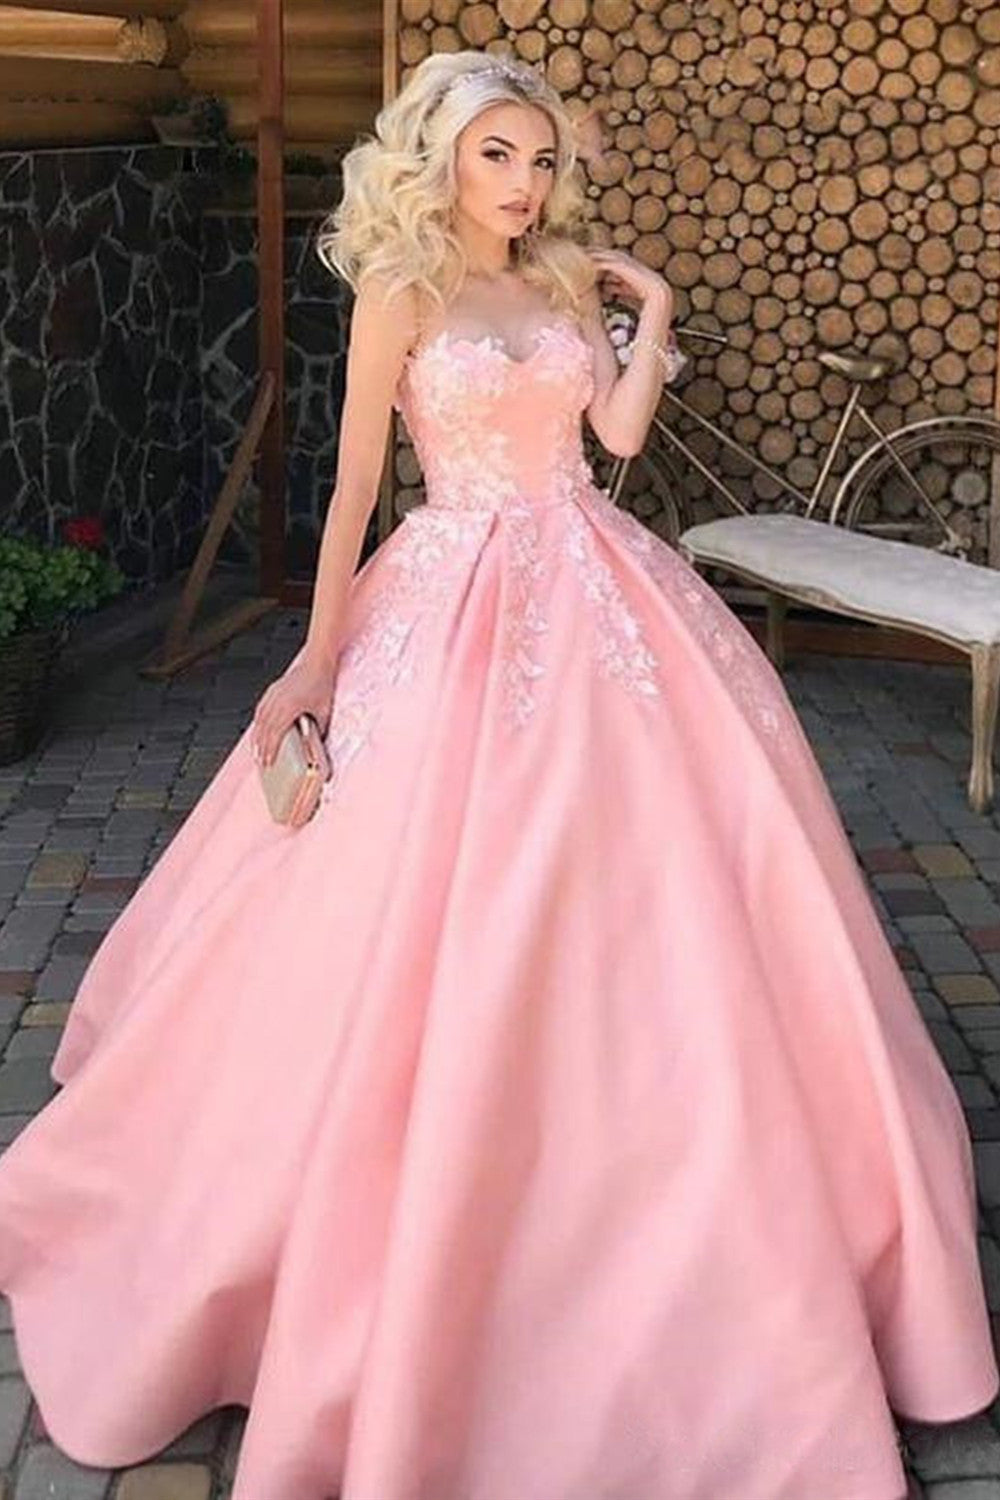 2021 Sweetheart Satin Lace Prom Dresses, A Line Popular Pink Bridal Gowns, Newest Wedding Dresses